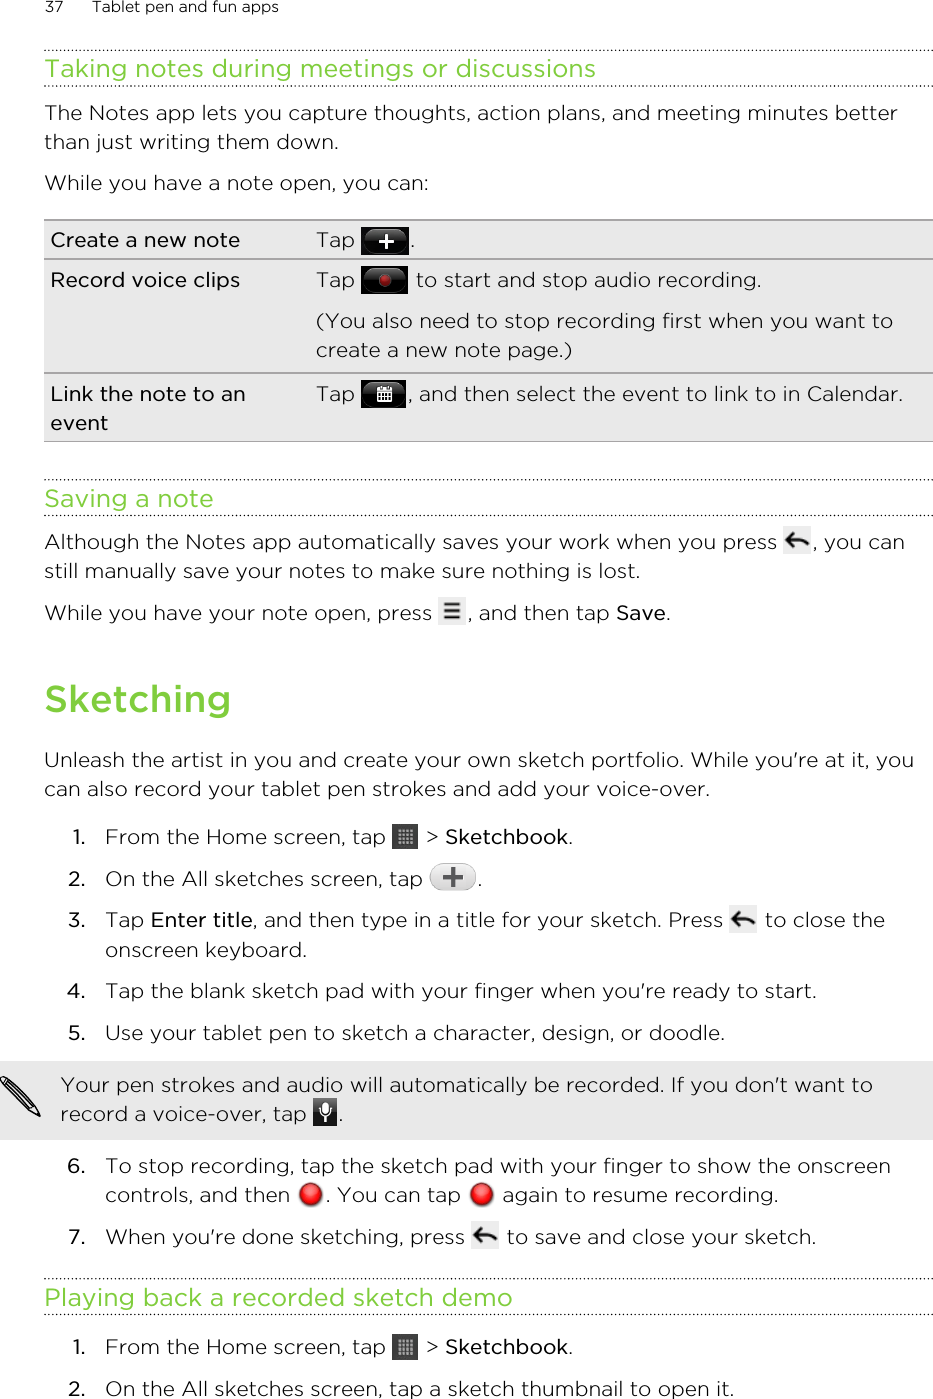 Taking notes during meetings or discussionsThe Notes app lets you capture thoughts, action plans, and meeting minutes betterthan just writing them down.While you have a note open, you can:Create a new note Tap  .Record voice clips Tap   to start and stop audio recording.(You also need to stop recording first when you want tocreate a new note page.)Link the note to aneventTap  , and then select the event to link to in Calendar.Saving a noteAlthough the Notes app automatically saves your work when you press  , you canstill manually save your notes to make sure nothing is lost.While you have your note open, press  , and then tap Save.SketchingUnleash the artist in you and create your own sketch portfolio. While you&apos;re at it, youcan also record your tablet pen strokes and add your voice-over.1. From the Home screen, tap   &gt; Sketchbook.2. On the All sketches screen, tap  .3. Tap Enter title, and then type in a title for your sketch. Press   to close theonscreen keyboard.4. Tap the blank sketch pad with your finger when you&apos;re ready to start.5. Use your tablet pen to sketch a character, design, or doodle. Your pen strokes and audio will automatically be recorded. If you don&apos;t want torecord a voice-over, tap  .6. To stop recording, tap the sketch pad with your finger to show the onscreencontrols, and then  . You can tap   again to resume recording.7. When you&apos;re done sketching, press   to save and close your sketch.Playing back a recorded sketch demo1. From the Home screen, tap   &gt; Sketchbook.2. On the All sketches screen, tap a sketch thumbnail to open it.37 Tablet pen and fun apps